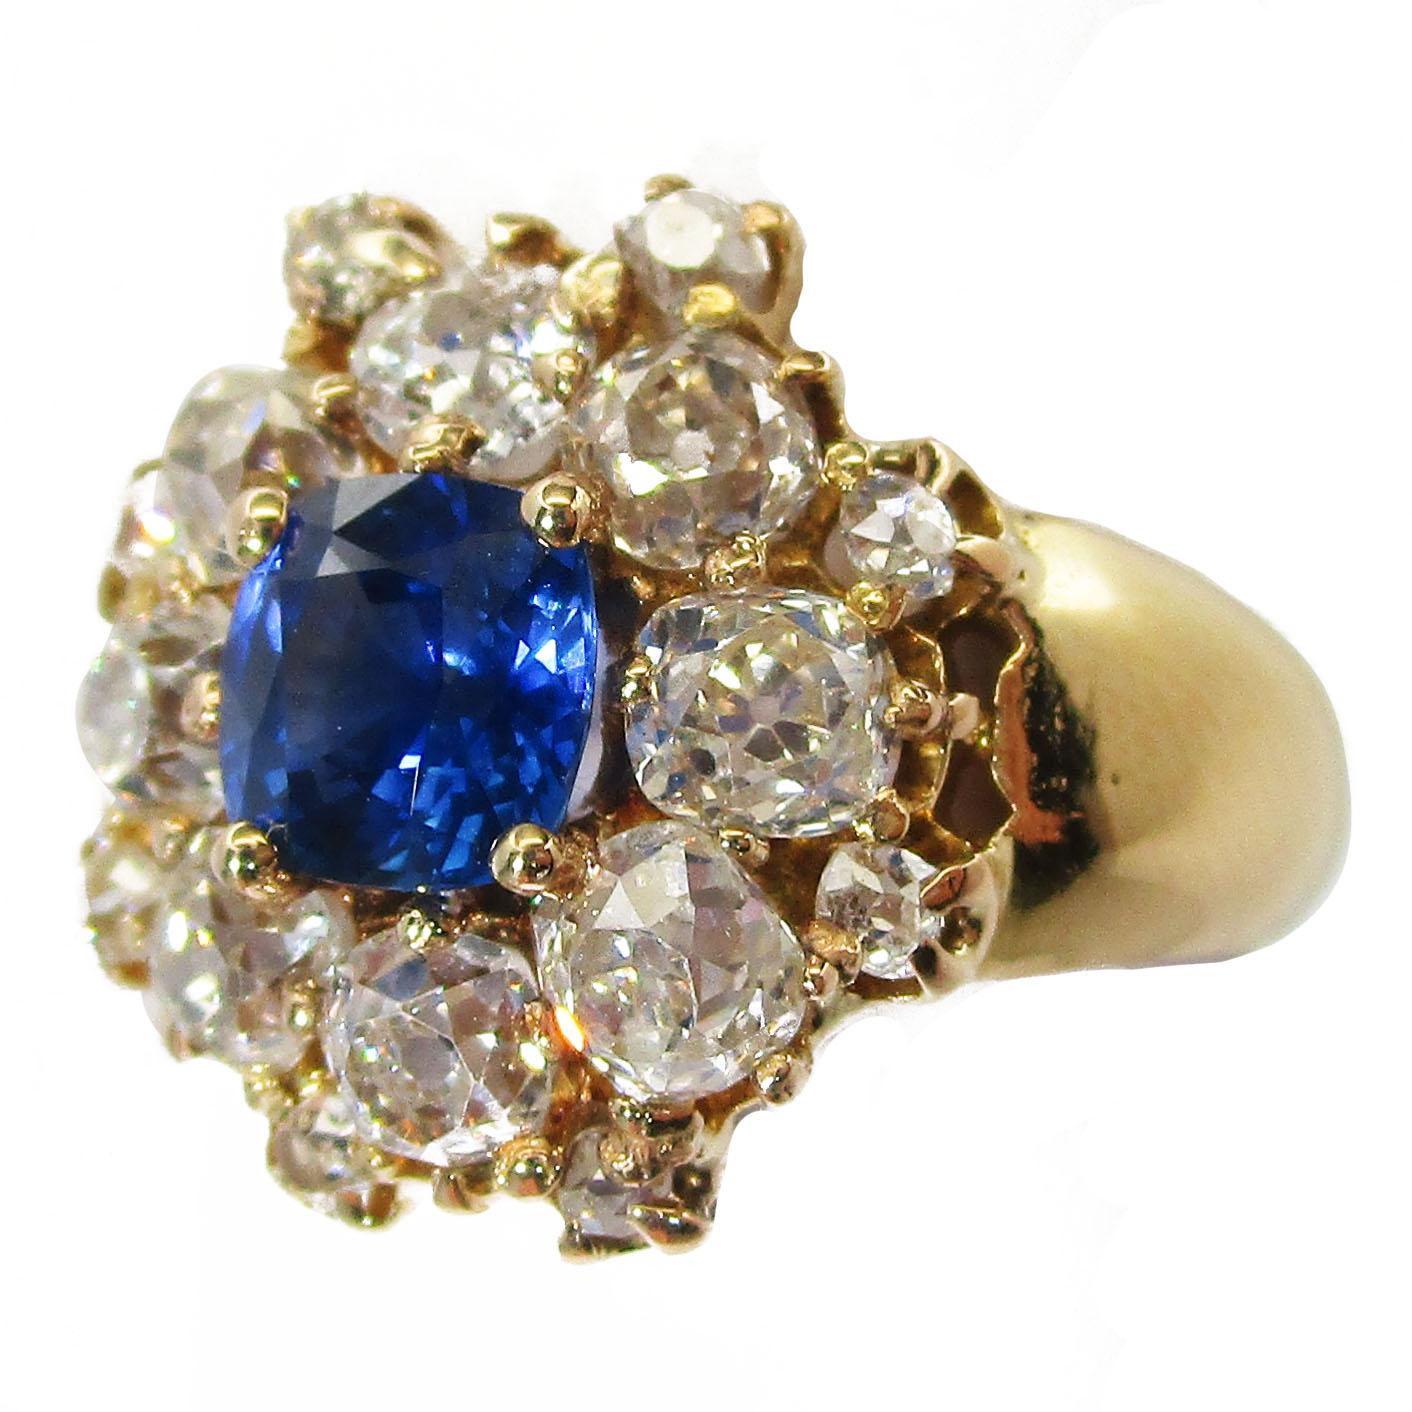 This ring boasts a brilliant, deep blue natural colored sapphire at its center that is nearly one carat! The center stone is cushion cut and such a rich blue that even in the soft evening light, it boasts royal blue depth! The sapphire is surrounded